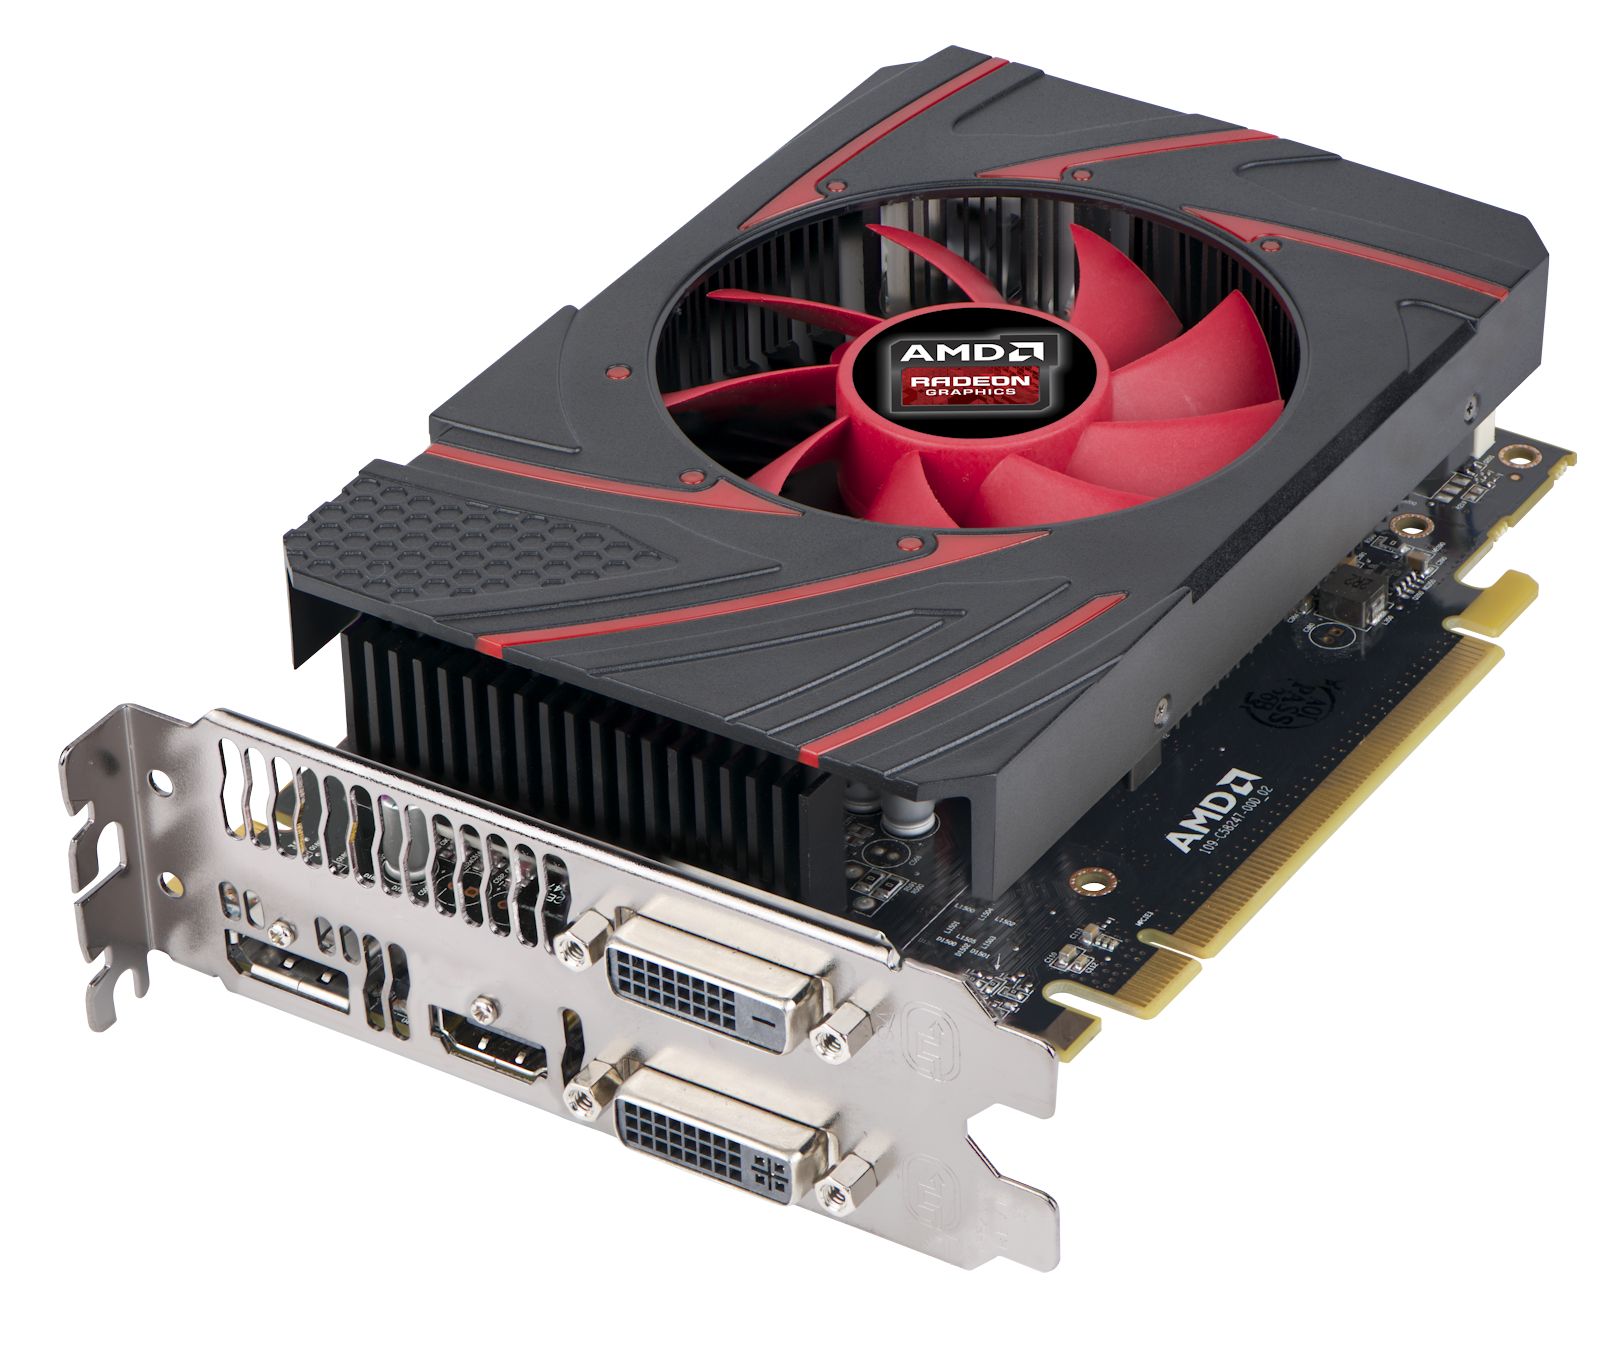 AMD Radeon R9 260 and R9 255 are now 